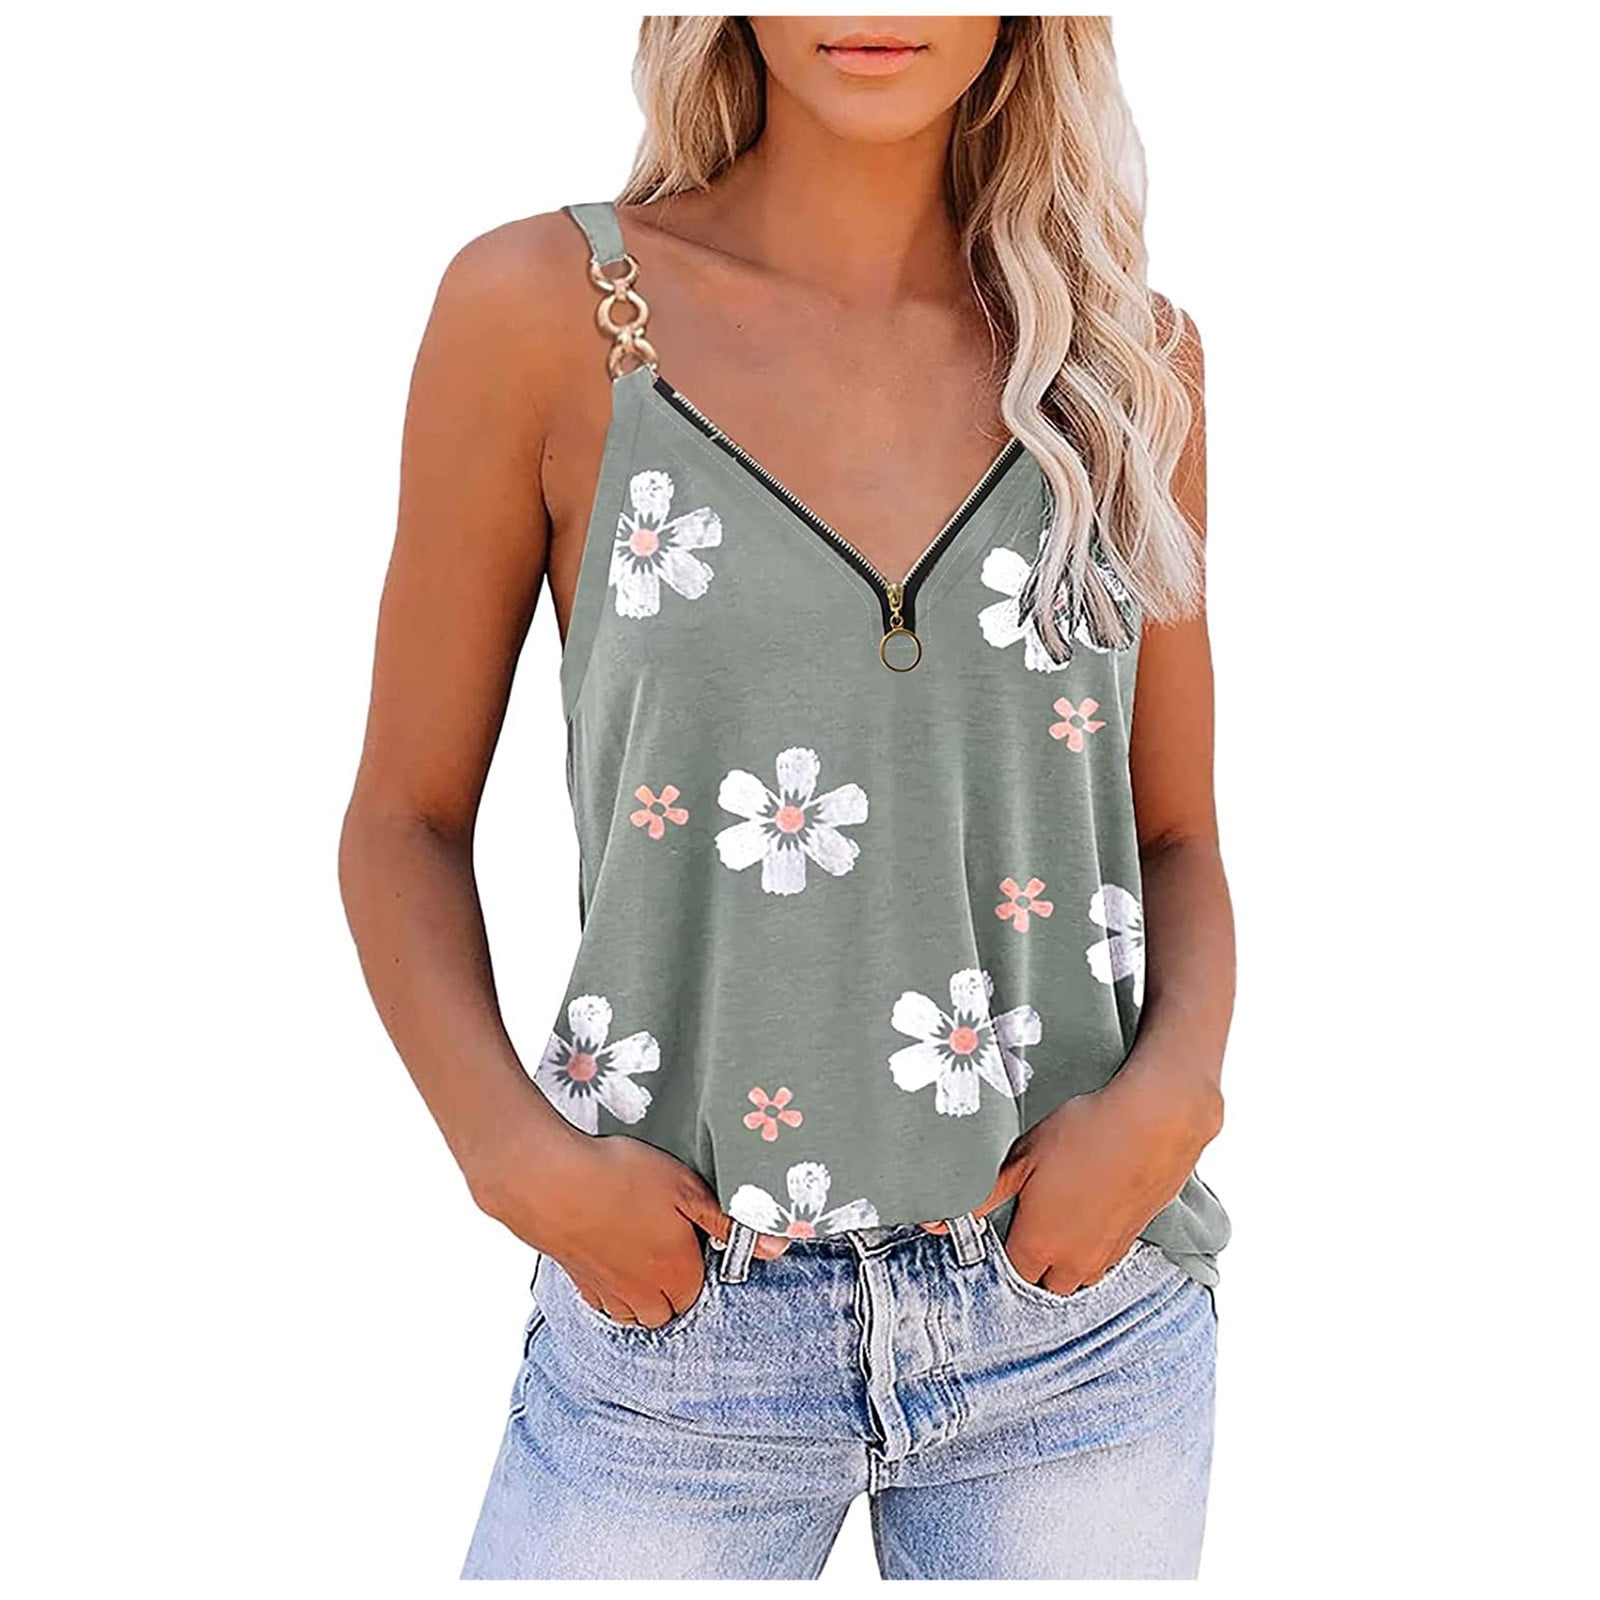 Ganfancp Summer Shirt for Women Short Sleeve Round Neck Casual Wear Tops Button Down Loose Tunic Tees Cartoon Print Blouse 